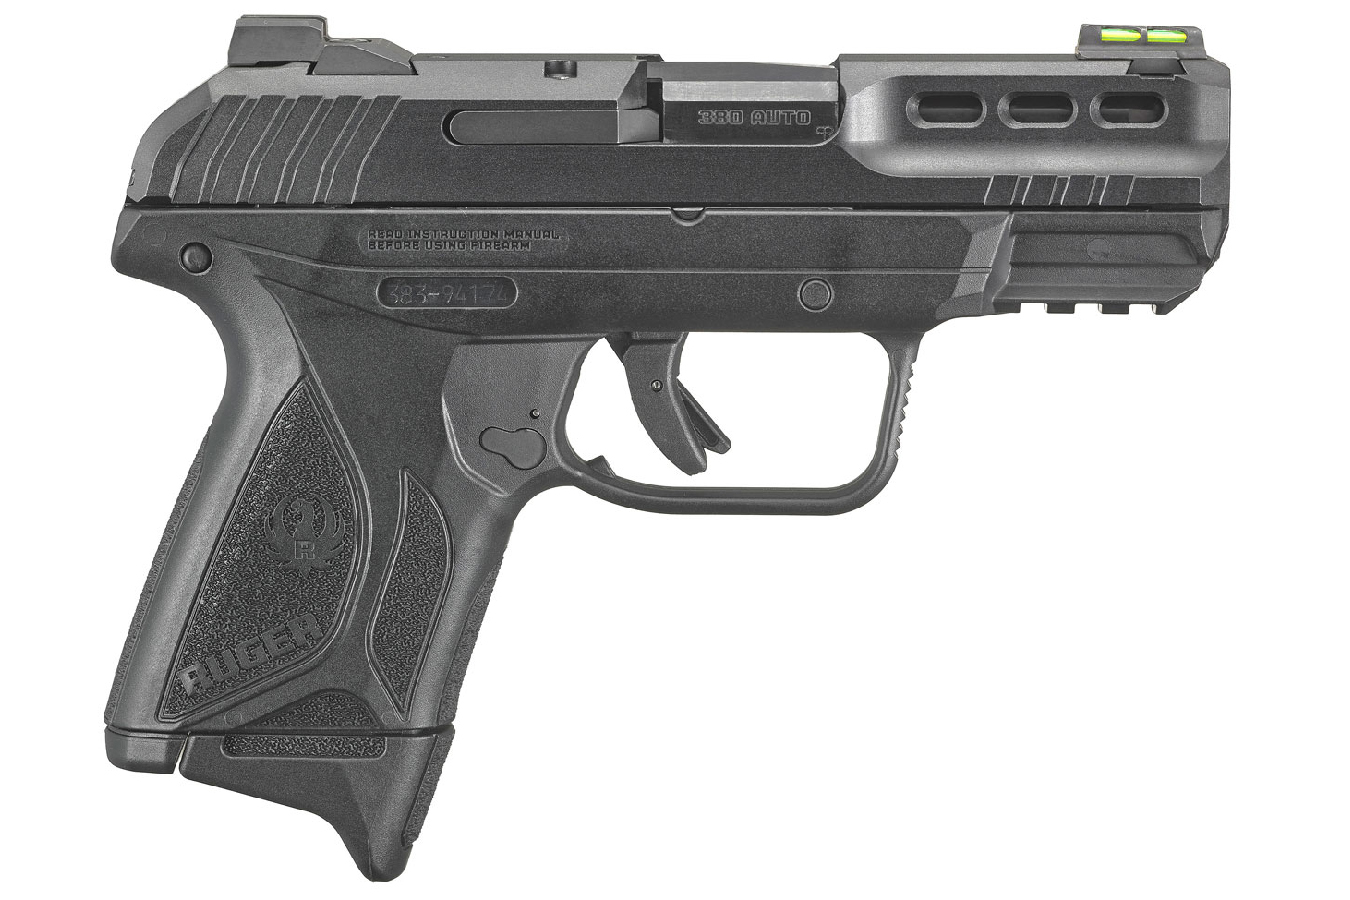 No. 11 Best Selling: RUGER SECURITY 380 PISTOL 380 ACP 3.42 IN BBL 15 RD MAG